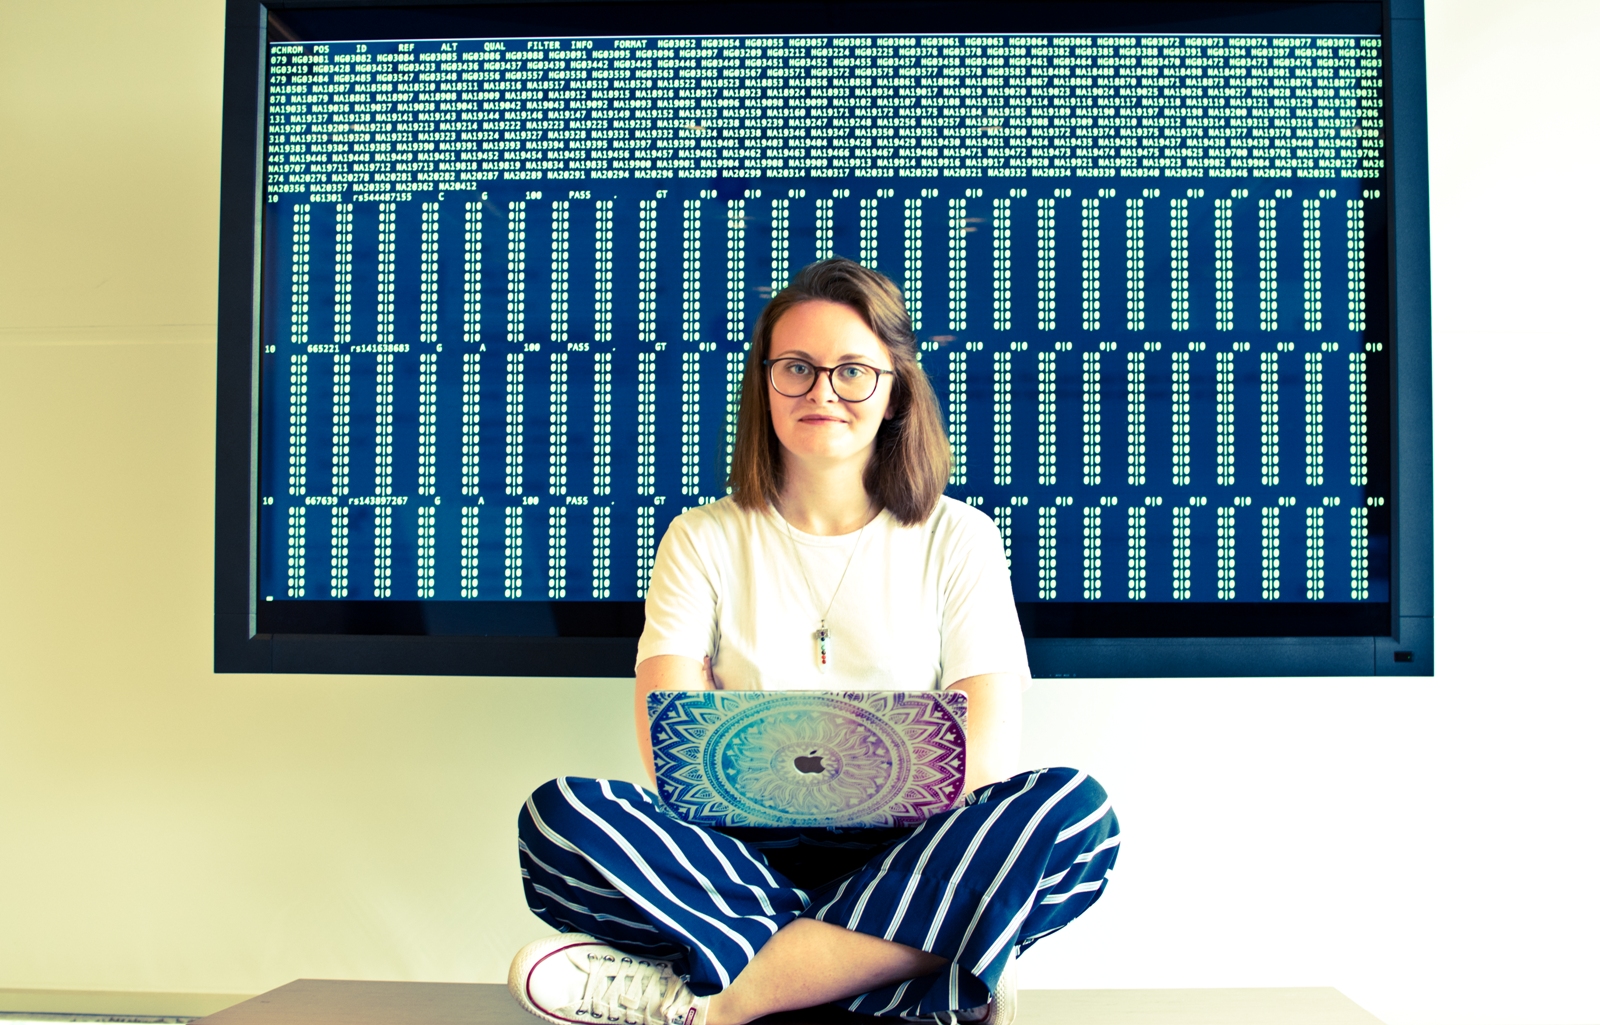 Emma Bailey sat with laptop and code on a screen behind